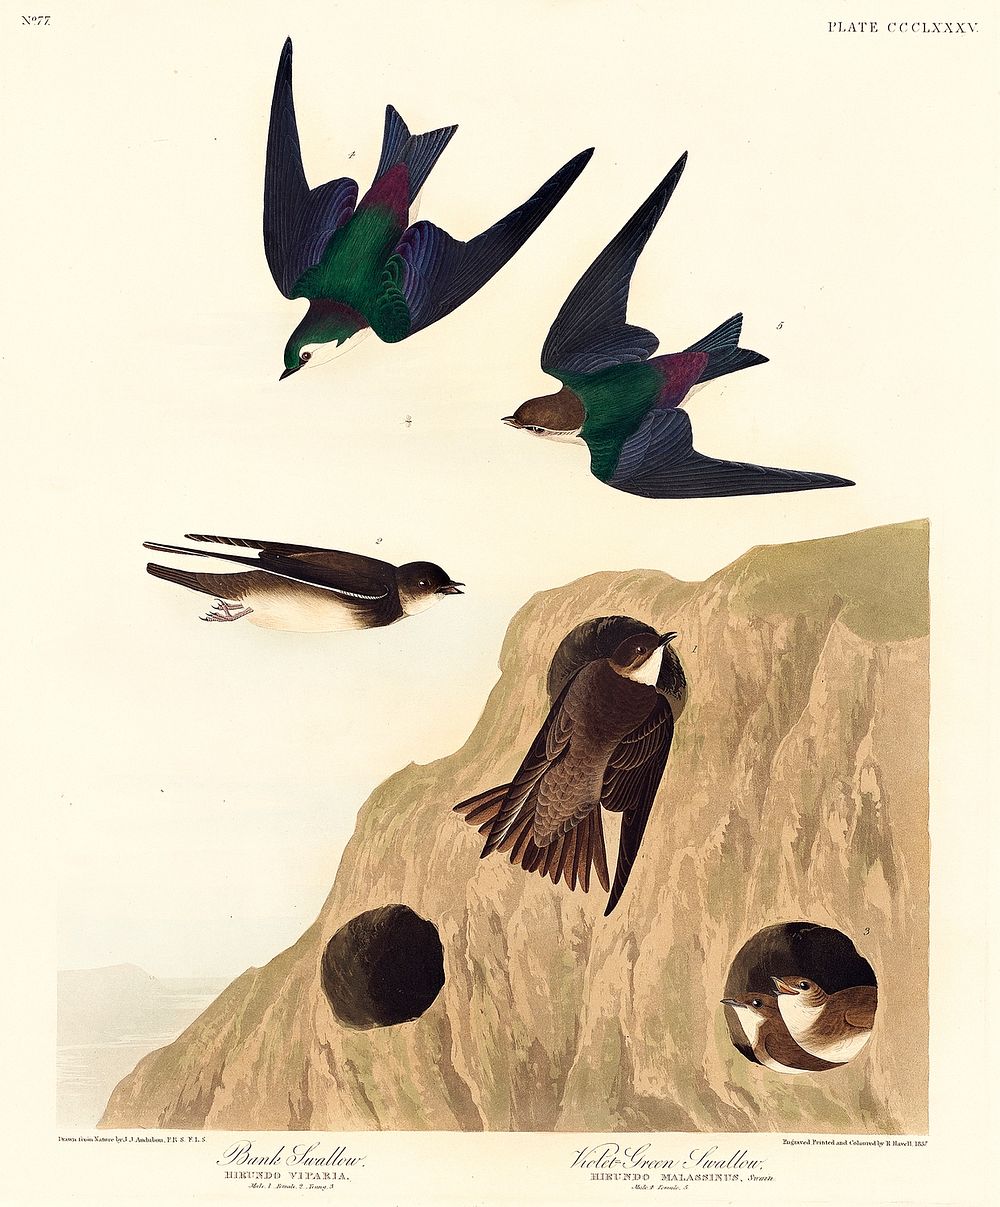 Bank Swallow and Violet-green Swallow from Birds of America (1827) by John James Audubon, etched by William Home Lizars.…